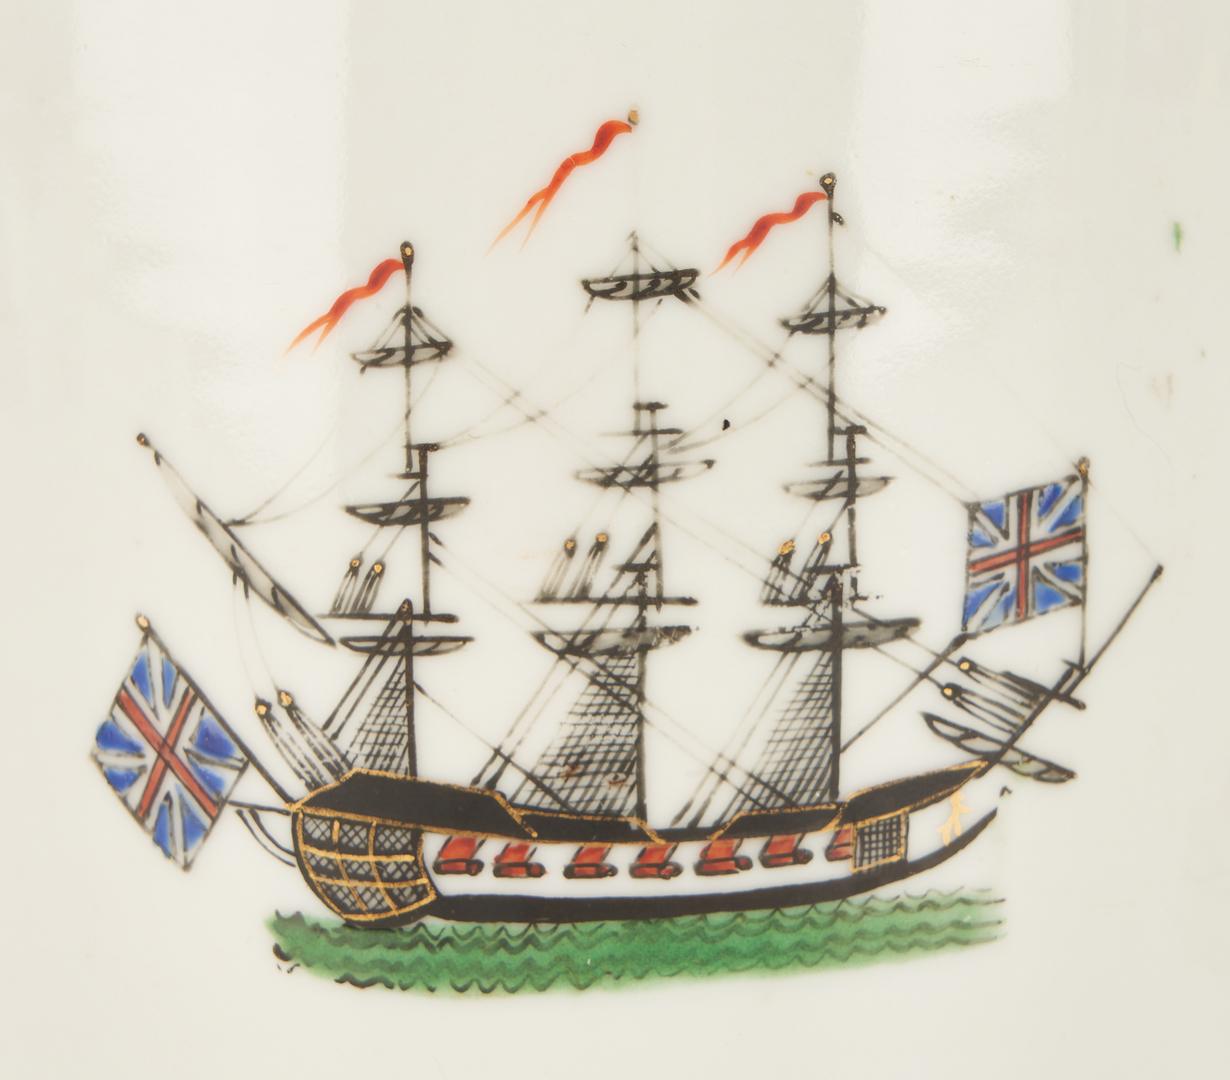 Lot 31: Chinese Export Porcelain Teapot with Ship Decoration